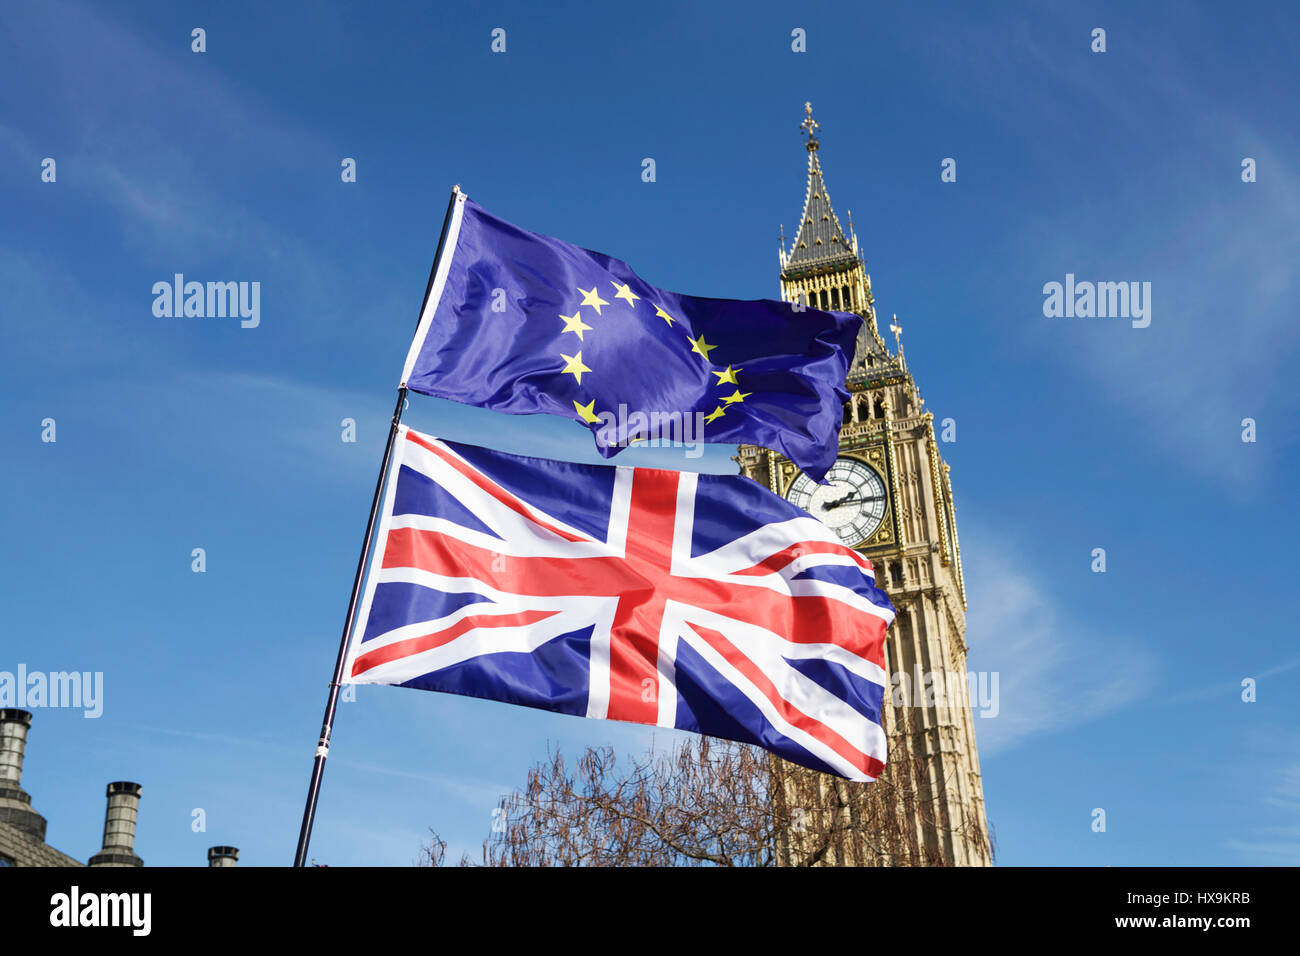 London, UK. 25th March 2017. Unite for Europe organised a Pro-EU march in London. Anti-BREXIT demonstrators march from Park Lane to Parliament Square. BREXIT flag, flags, Union Jack flag, EU flag, European flag, Big Ben. Parliament flags. UK politics UK. Brexit concept. British democracy. Vote Brexit. uk parliament brexit deal. Trade talks. Stock Photo